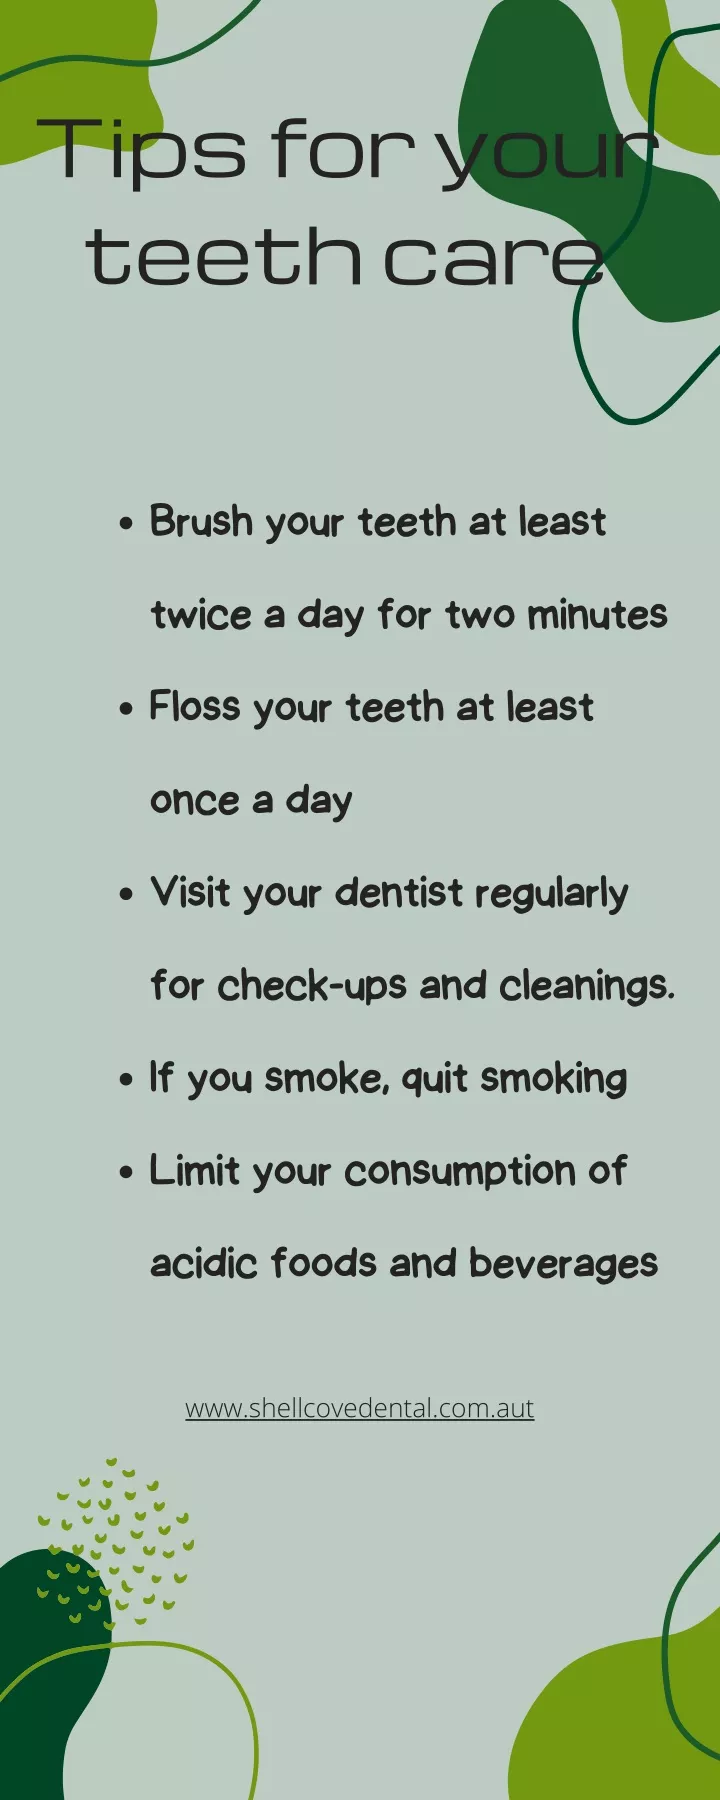 tips for your teeth care